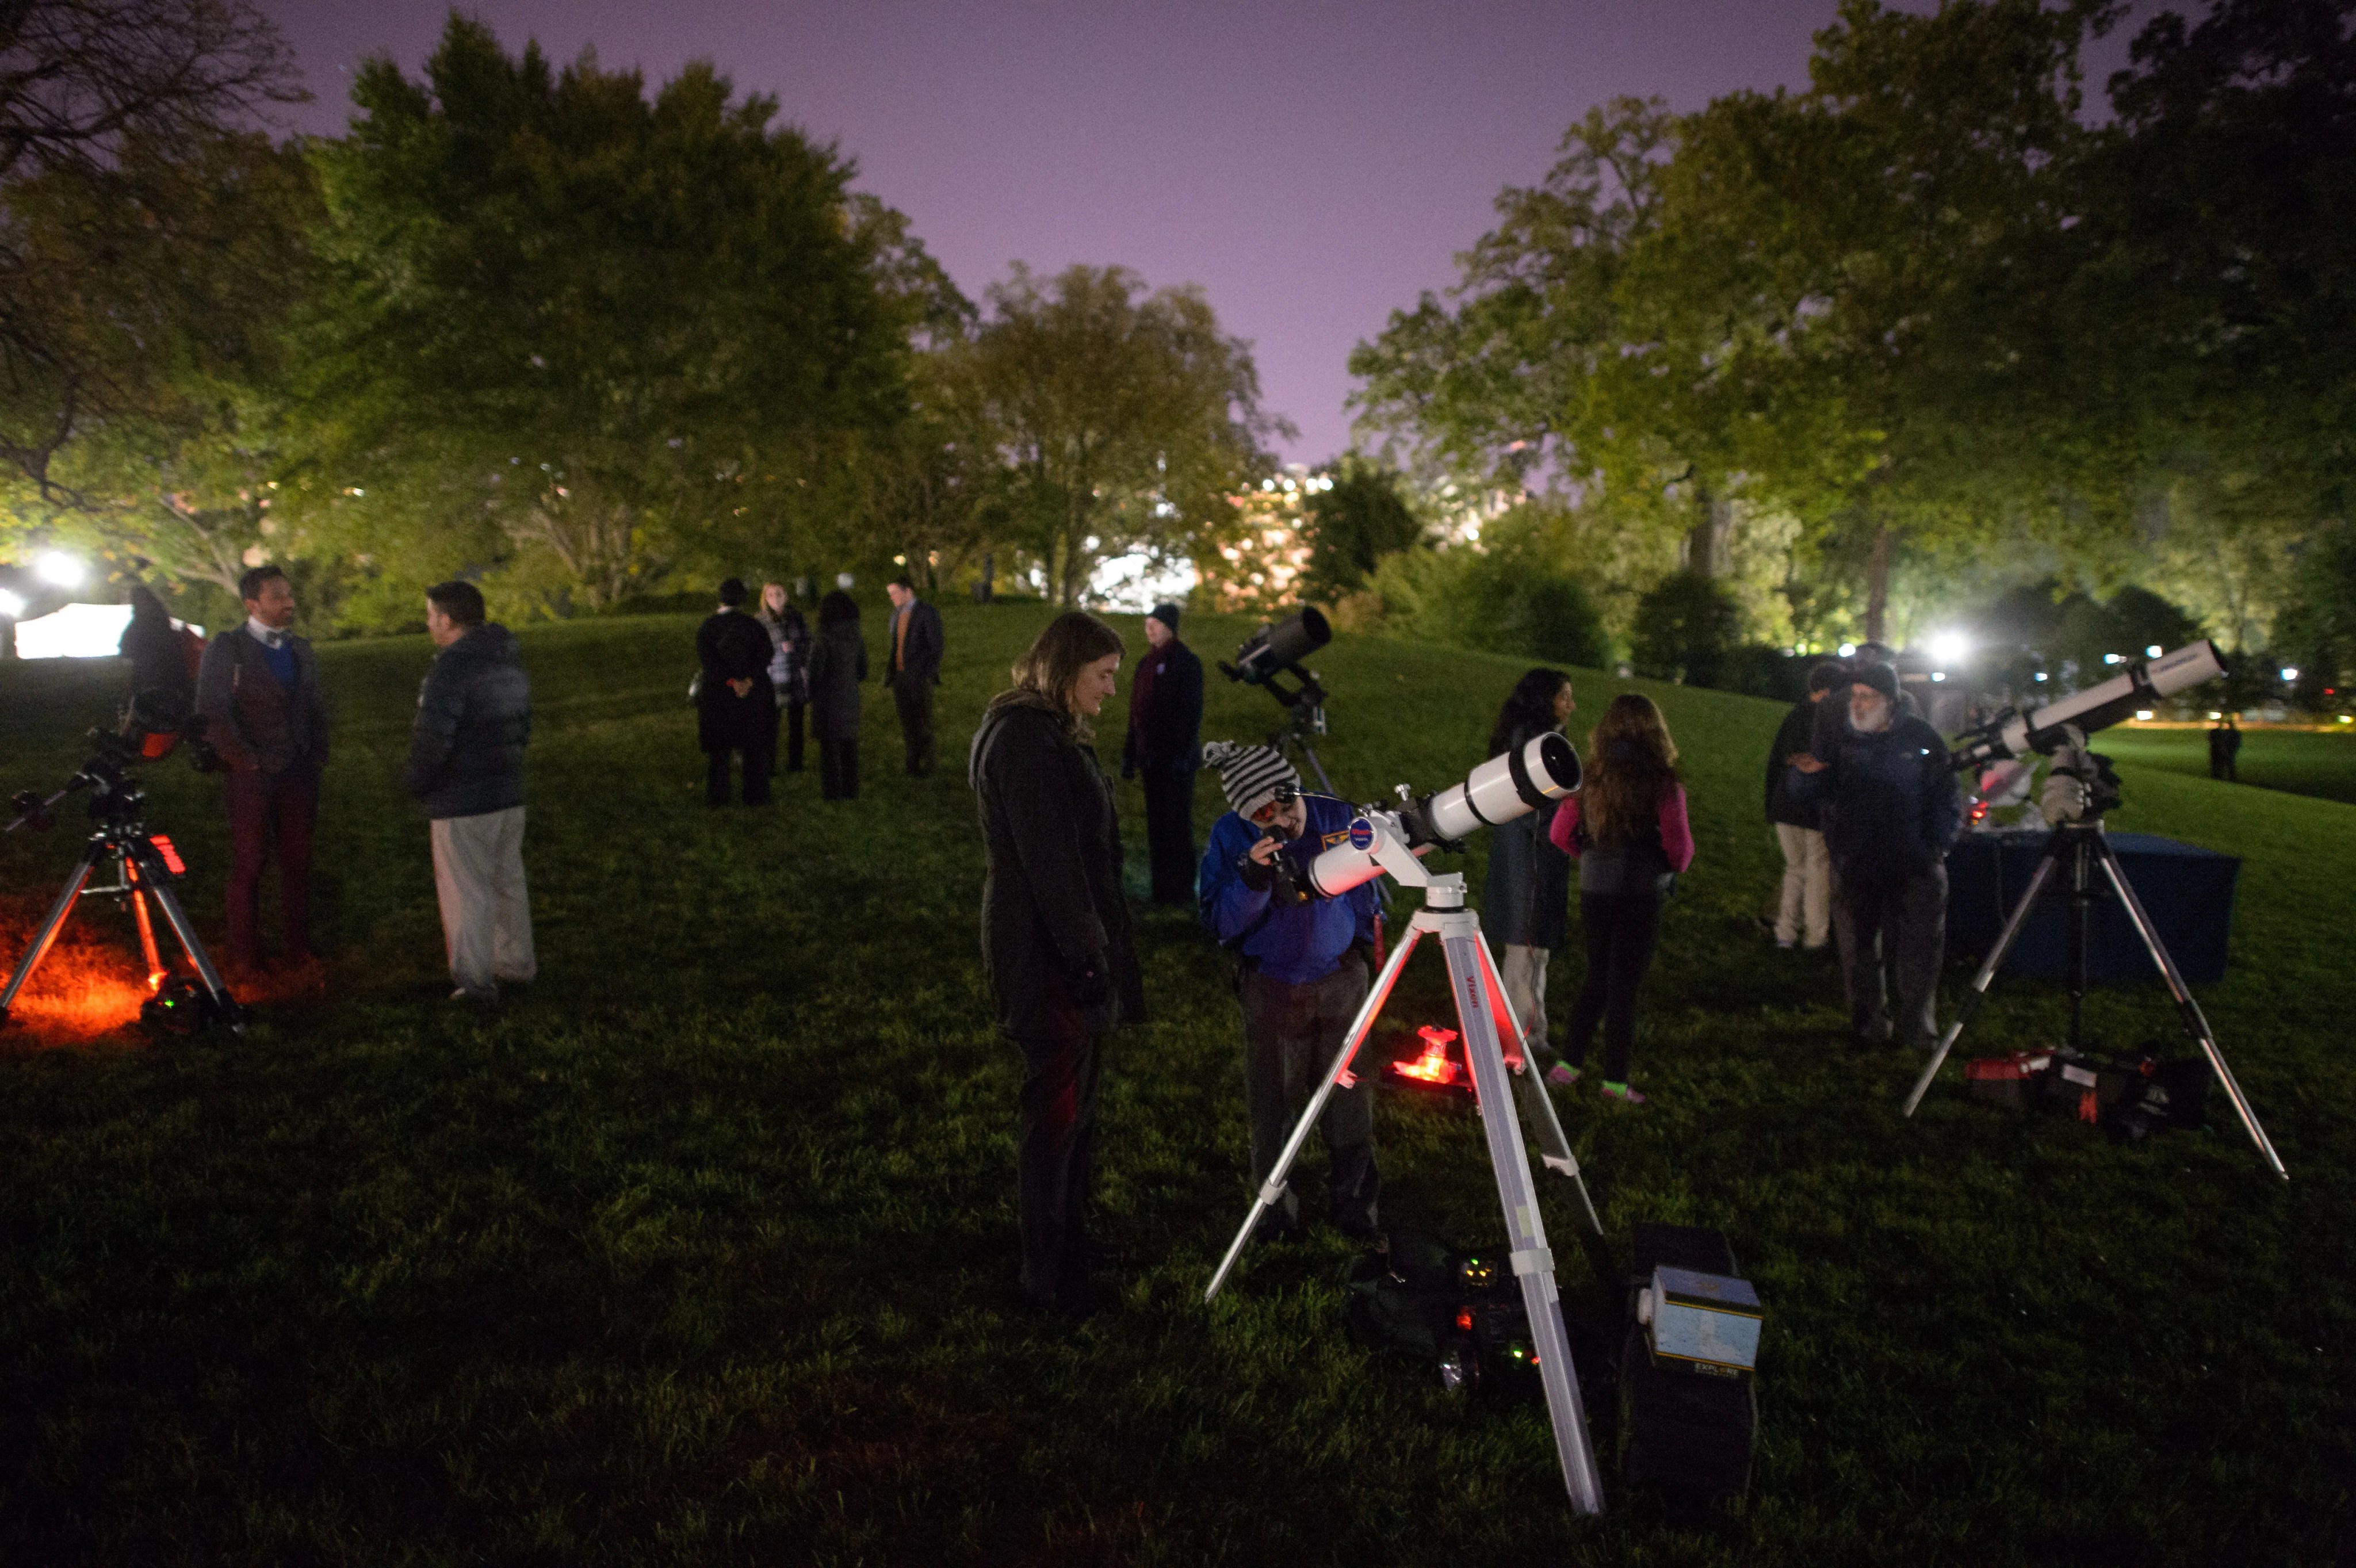 A child gazes into the eyepiece of a small telescope set up on a grassy lawn at night as an adult woman looks on. Other observers and telescopes are nearby.